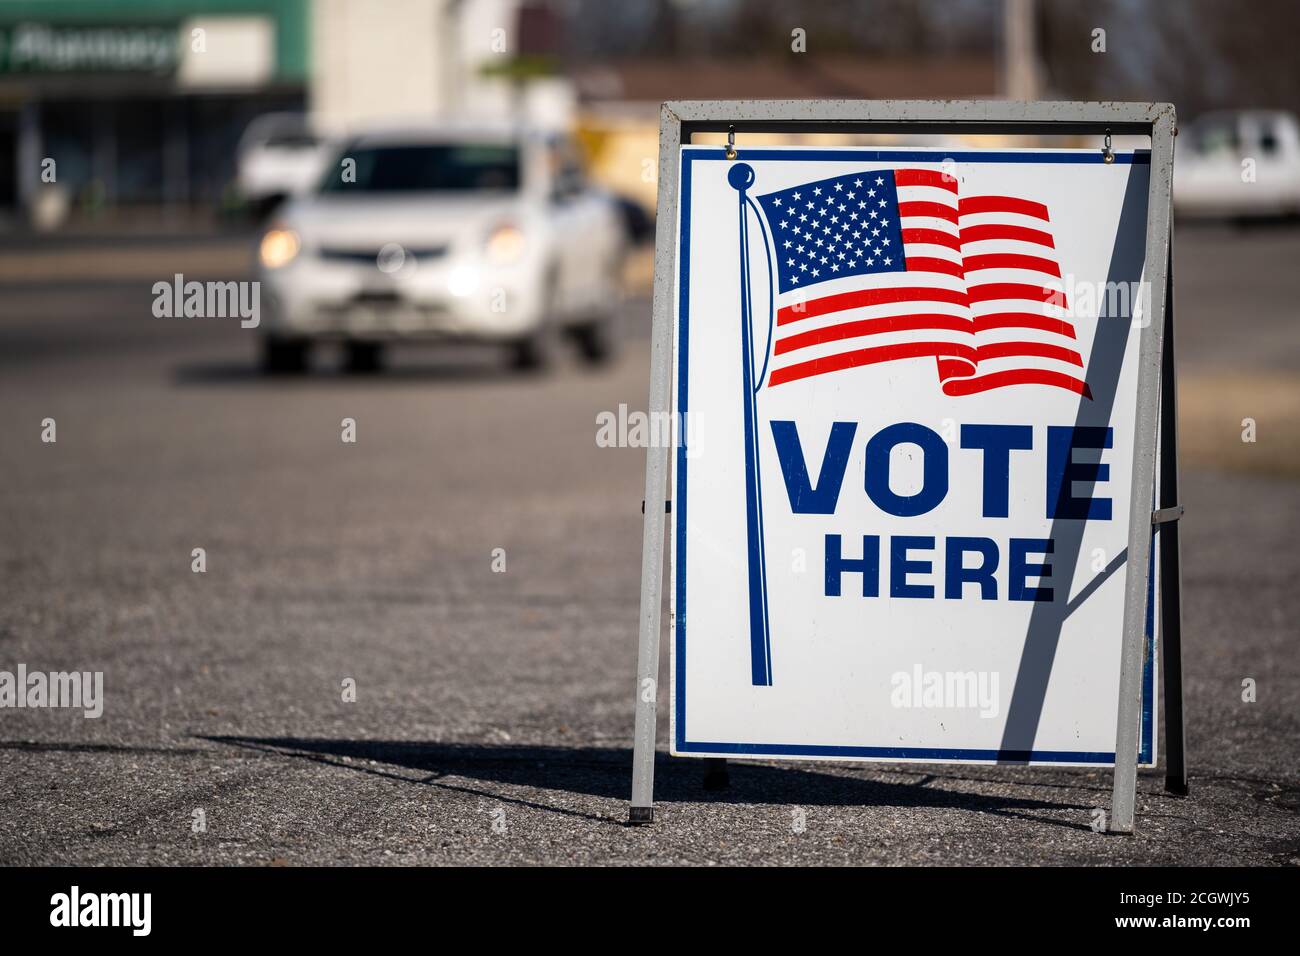 Vote Here sign in a parking lot Stock Photo